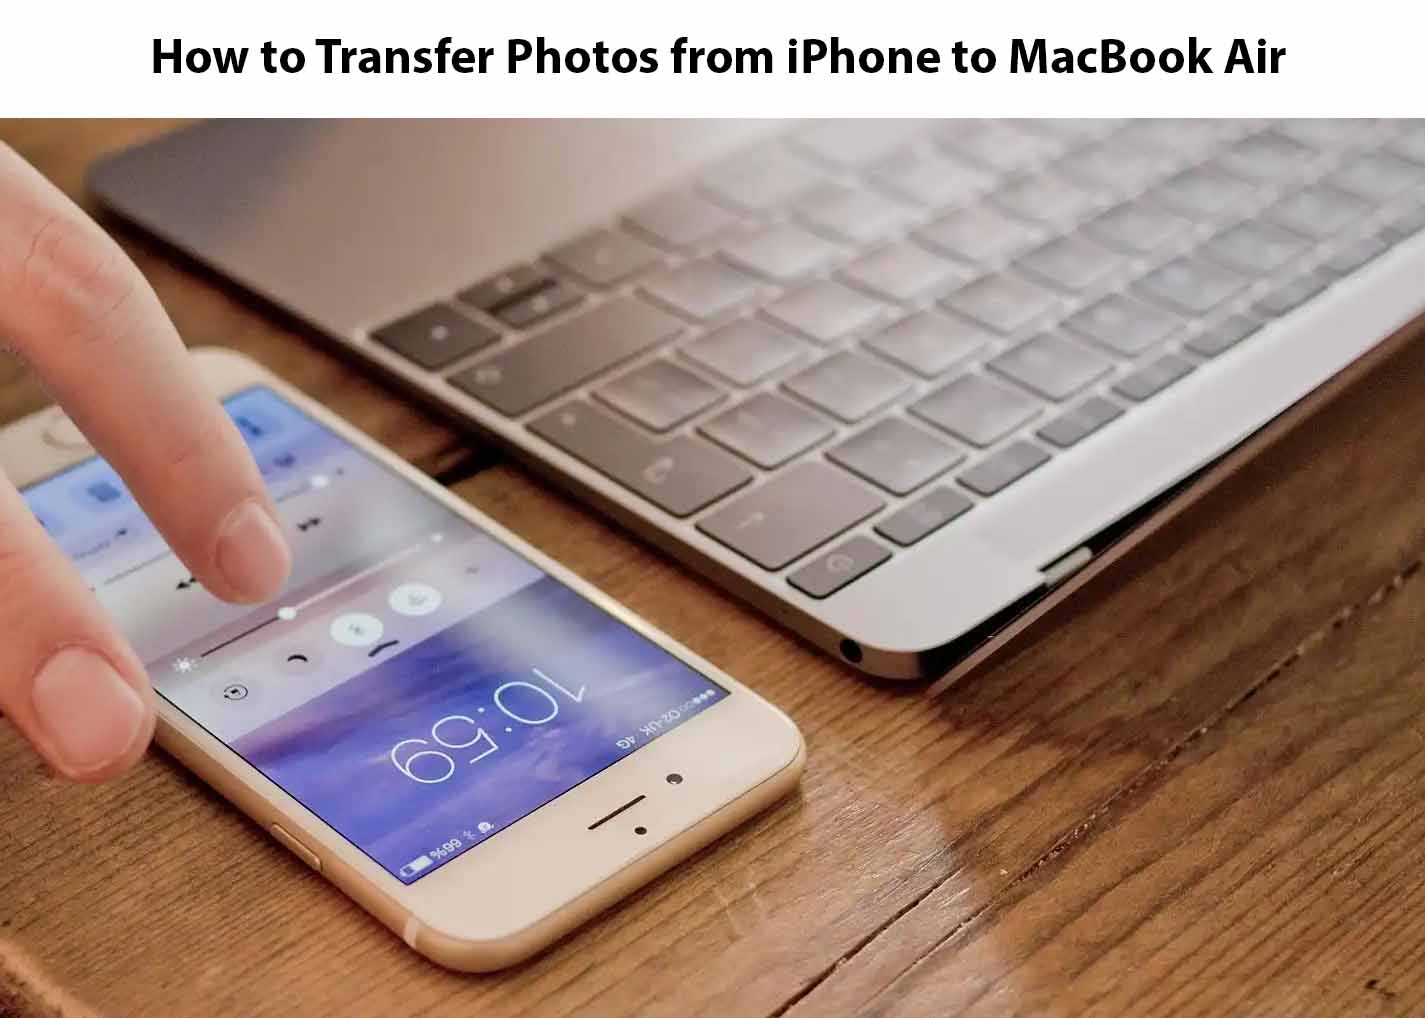 How to Transfer Photos from iPhone to MacBook Air